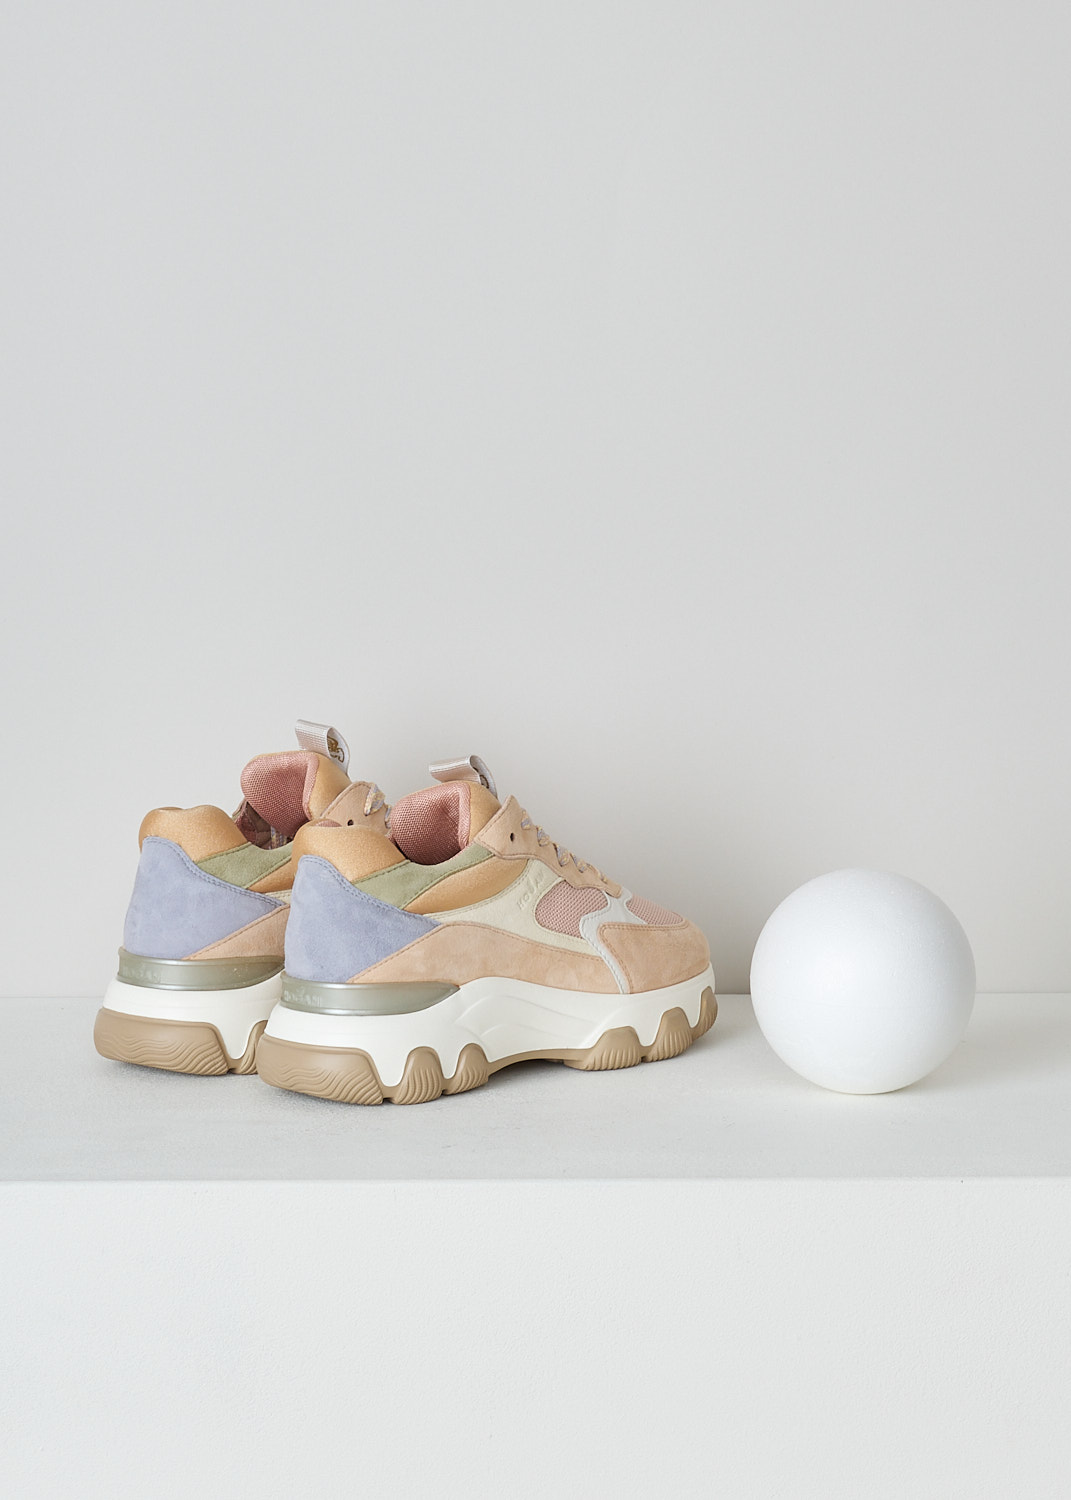 HOGAN, HYPERACTIVE ALLACCIATO MULTICOLORED SNEAKERS, HXW5400DG60QZ80MR4_QZ8,  Pink, Beige, Orange, Back,  These chunky sneakers feature front lace-up fastening with multicolored laces. The sneakers have a paneled look, alternating leather and fabric patches in pastel tones. These sneakers have a chunky sole. The sneakers have a removable memory foam insole and comes with an additional pair of dusty pink laces.   
